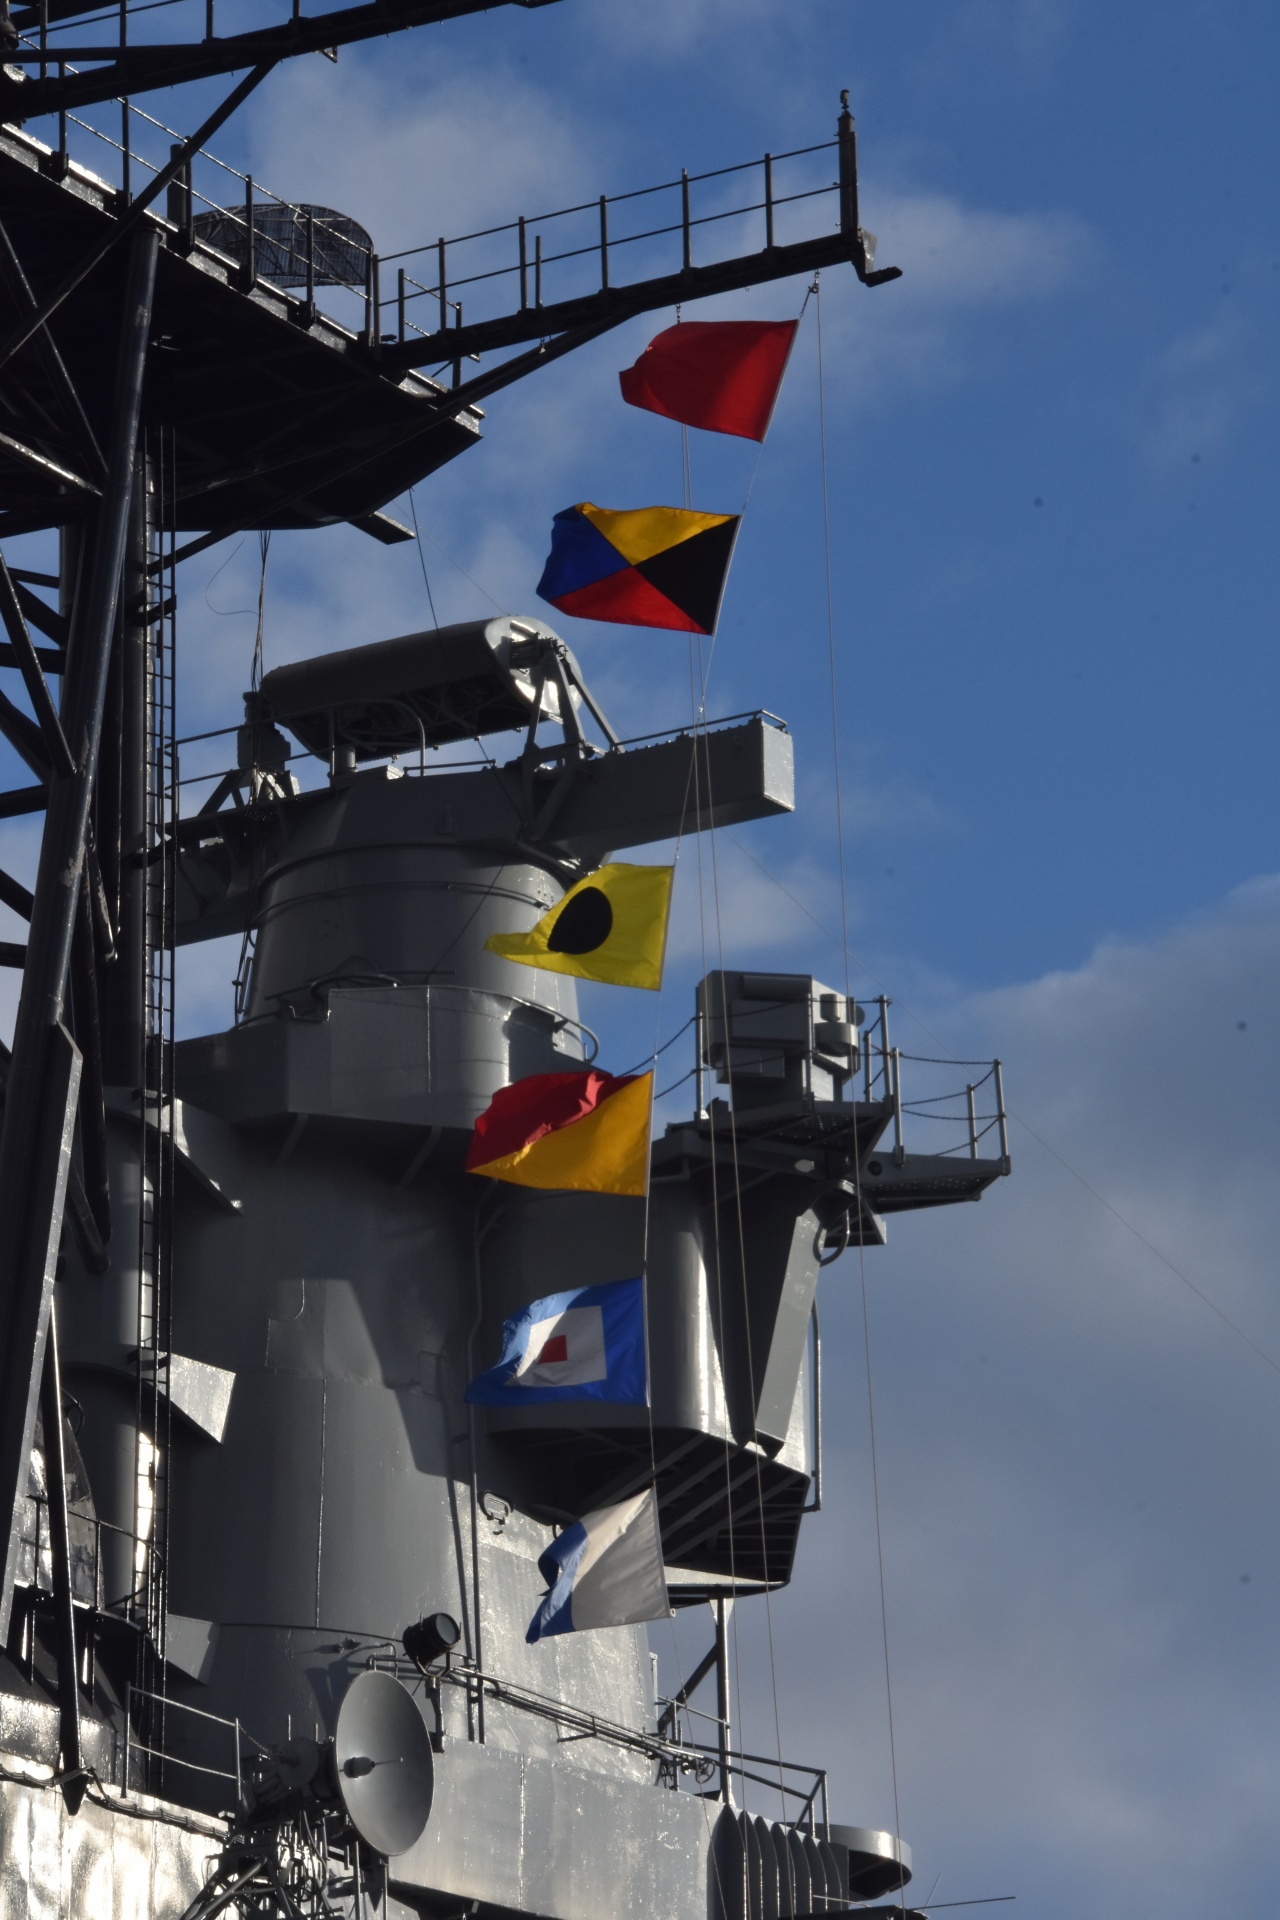 flags flying from the Battleship Iowa docked in San Pedro, California